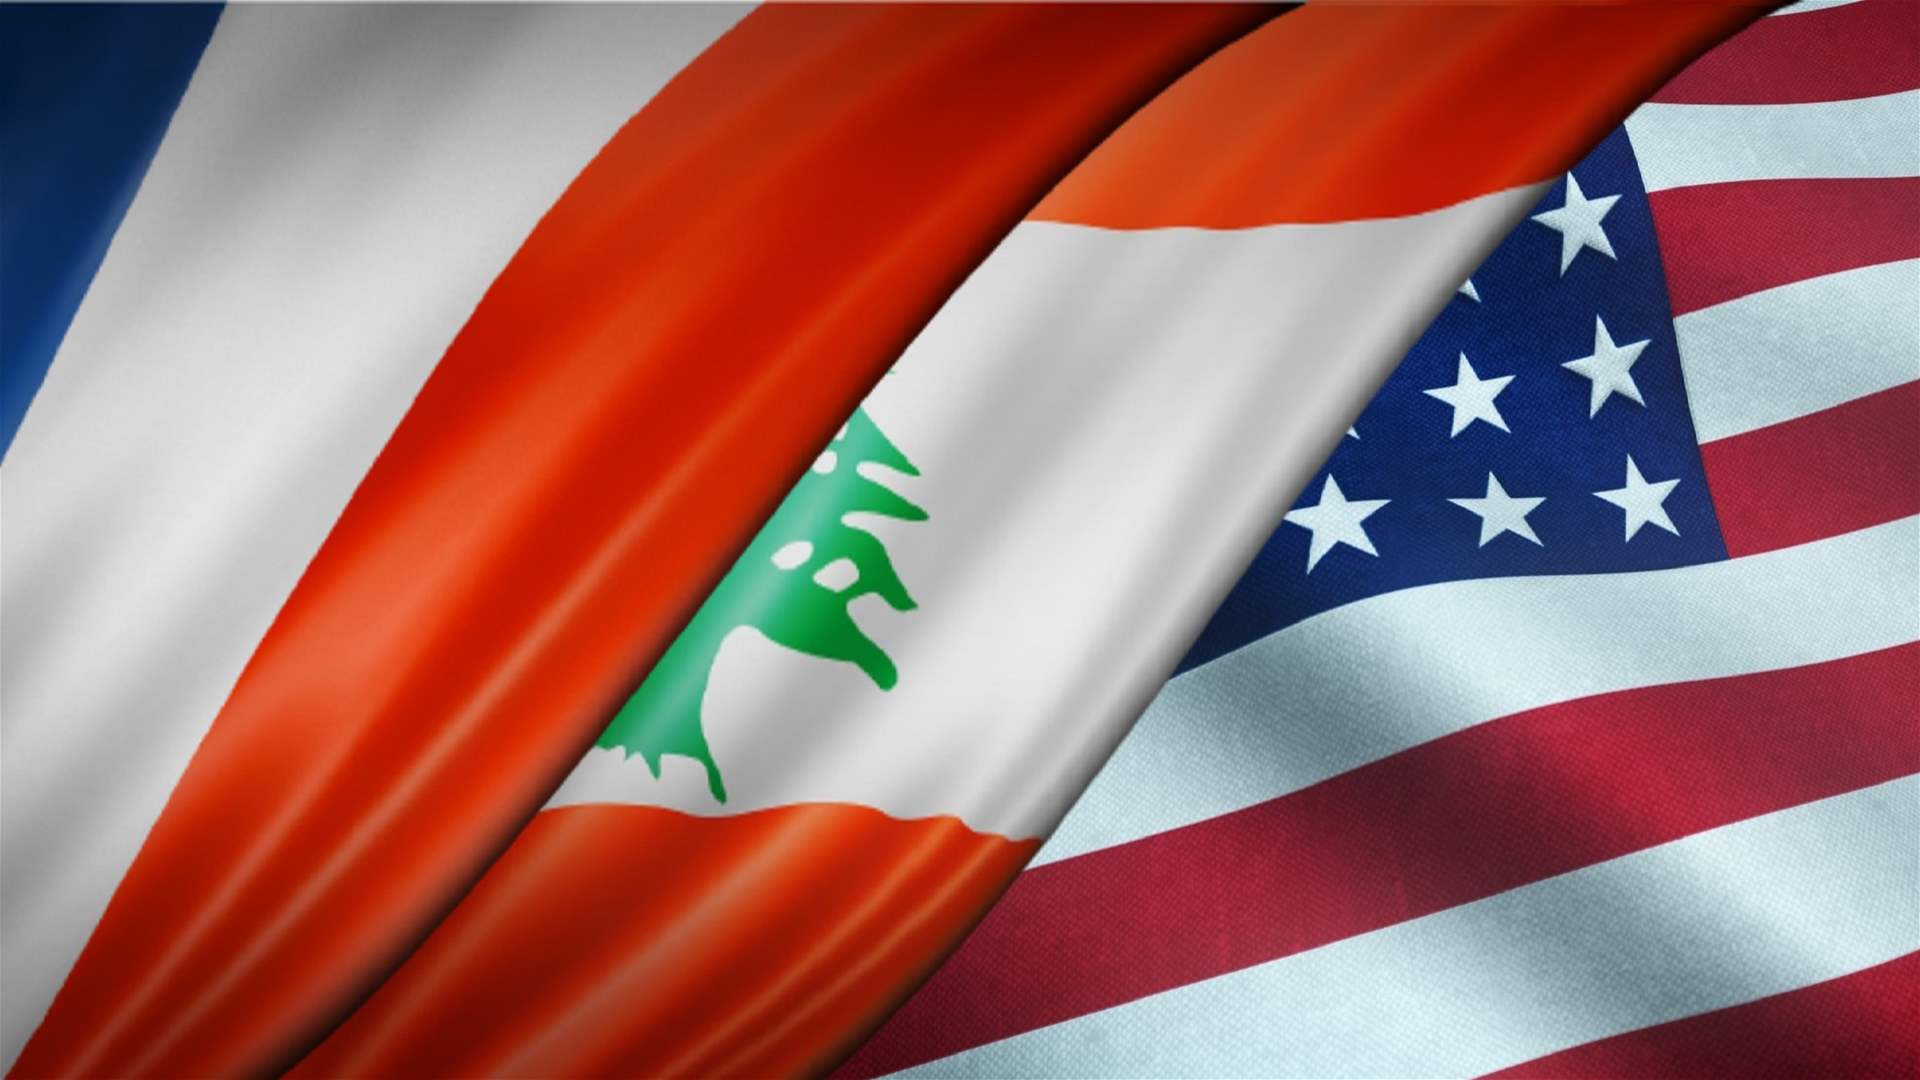 US and France diverge in approach to Hezbollah and Lebanese politics